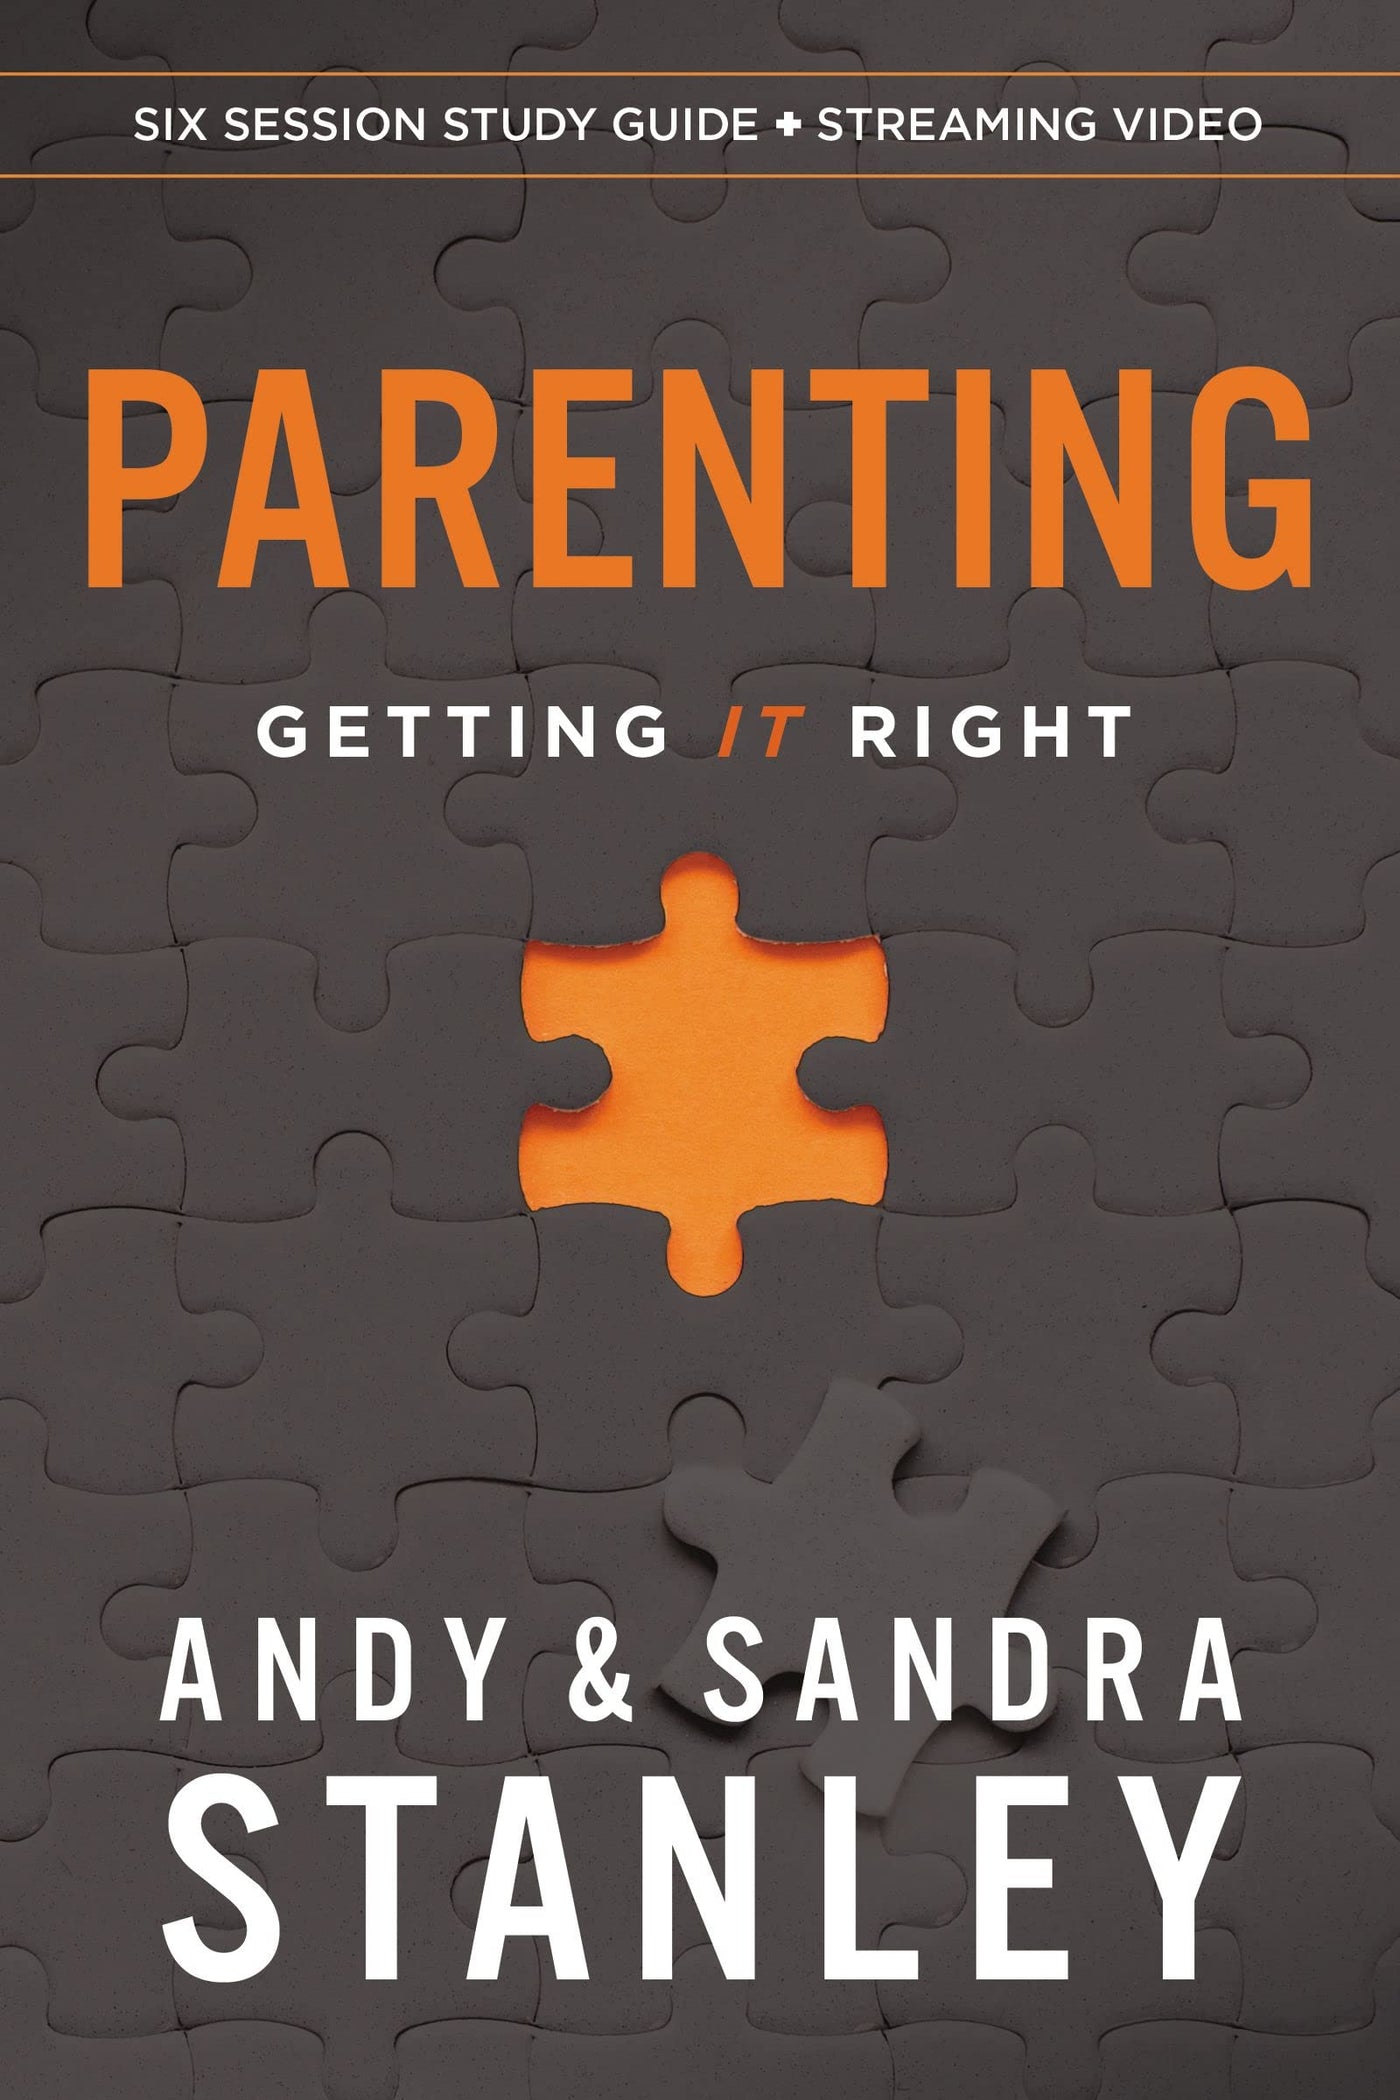 Parenting: Getting It Right Study Guide + Streaming Videos